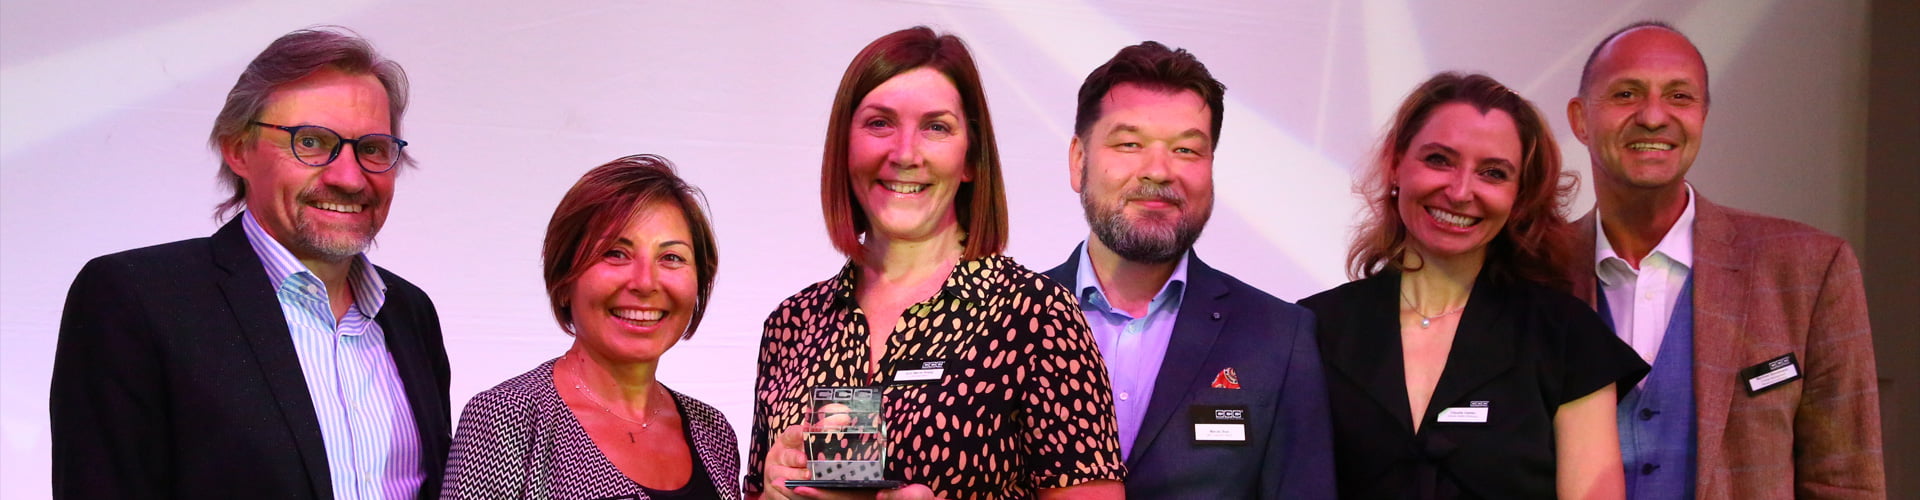 Ann-Marie Stagg recognised for her outstanding contribution to the contact centre industry.